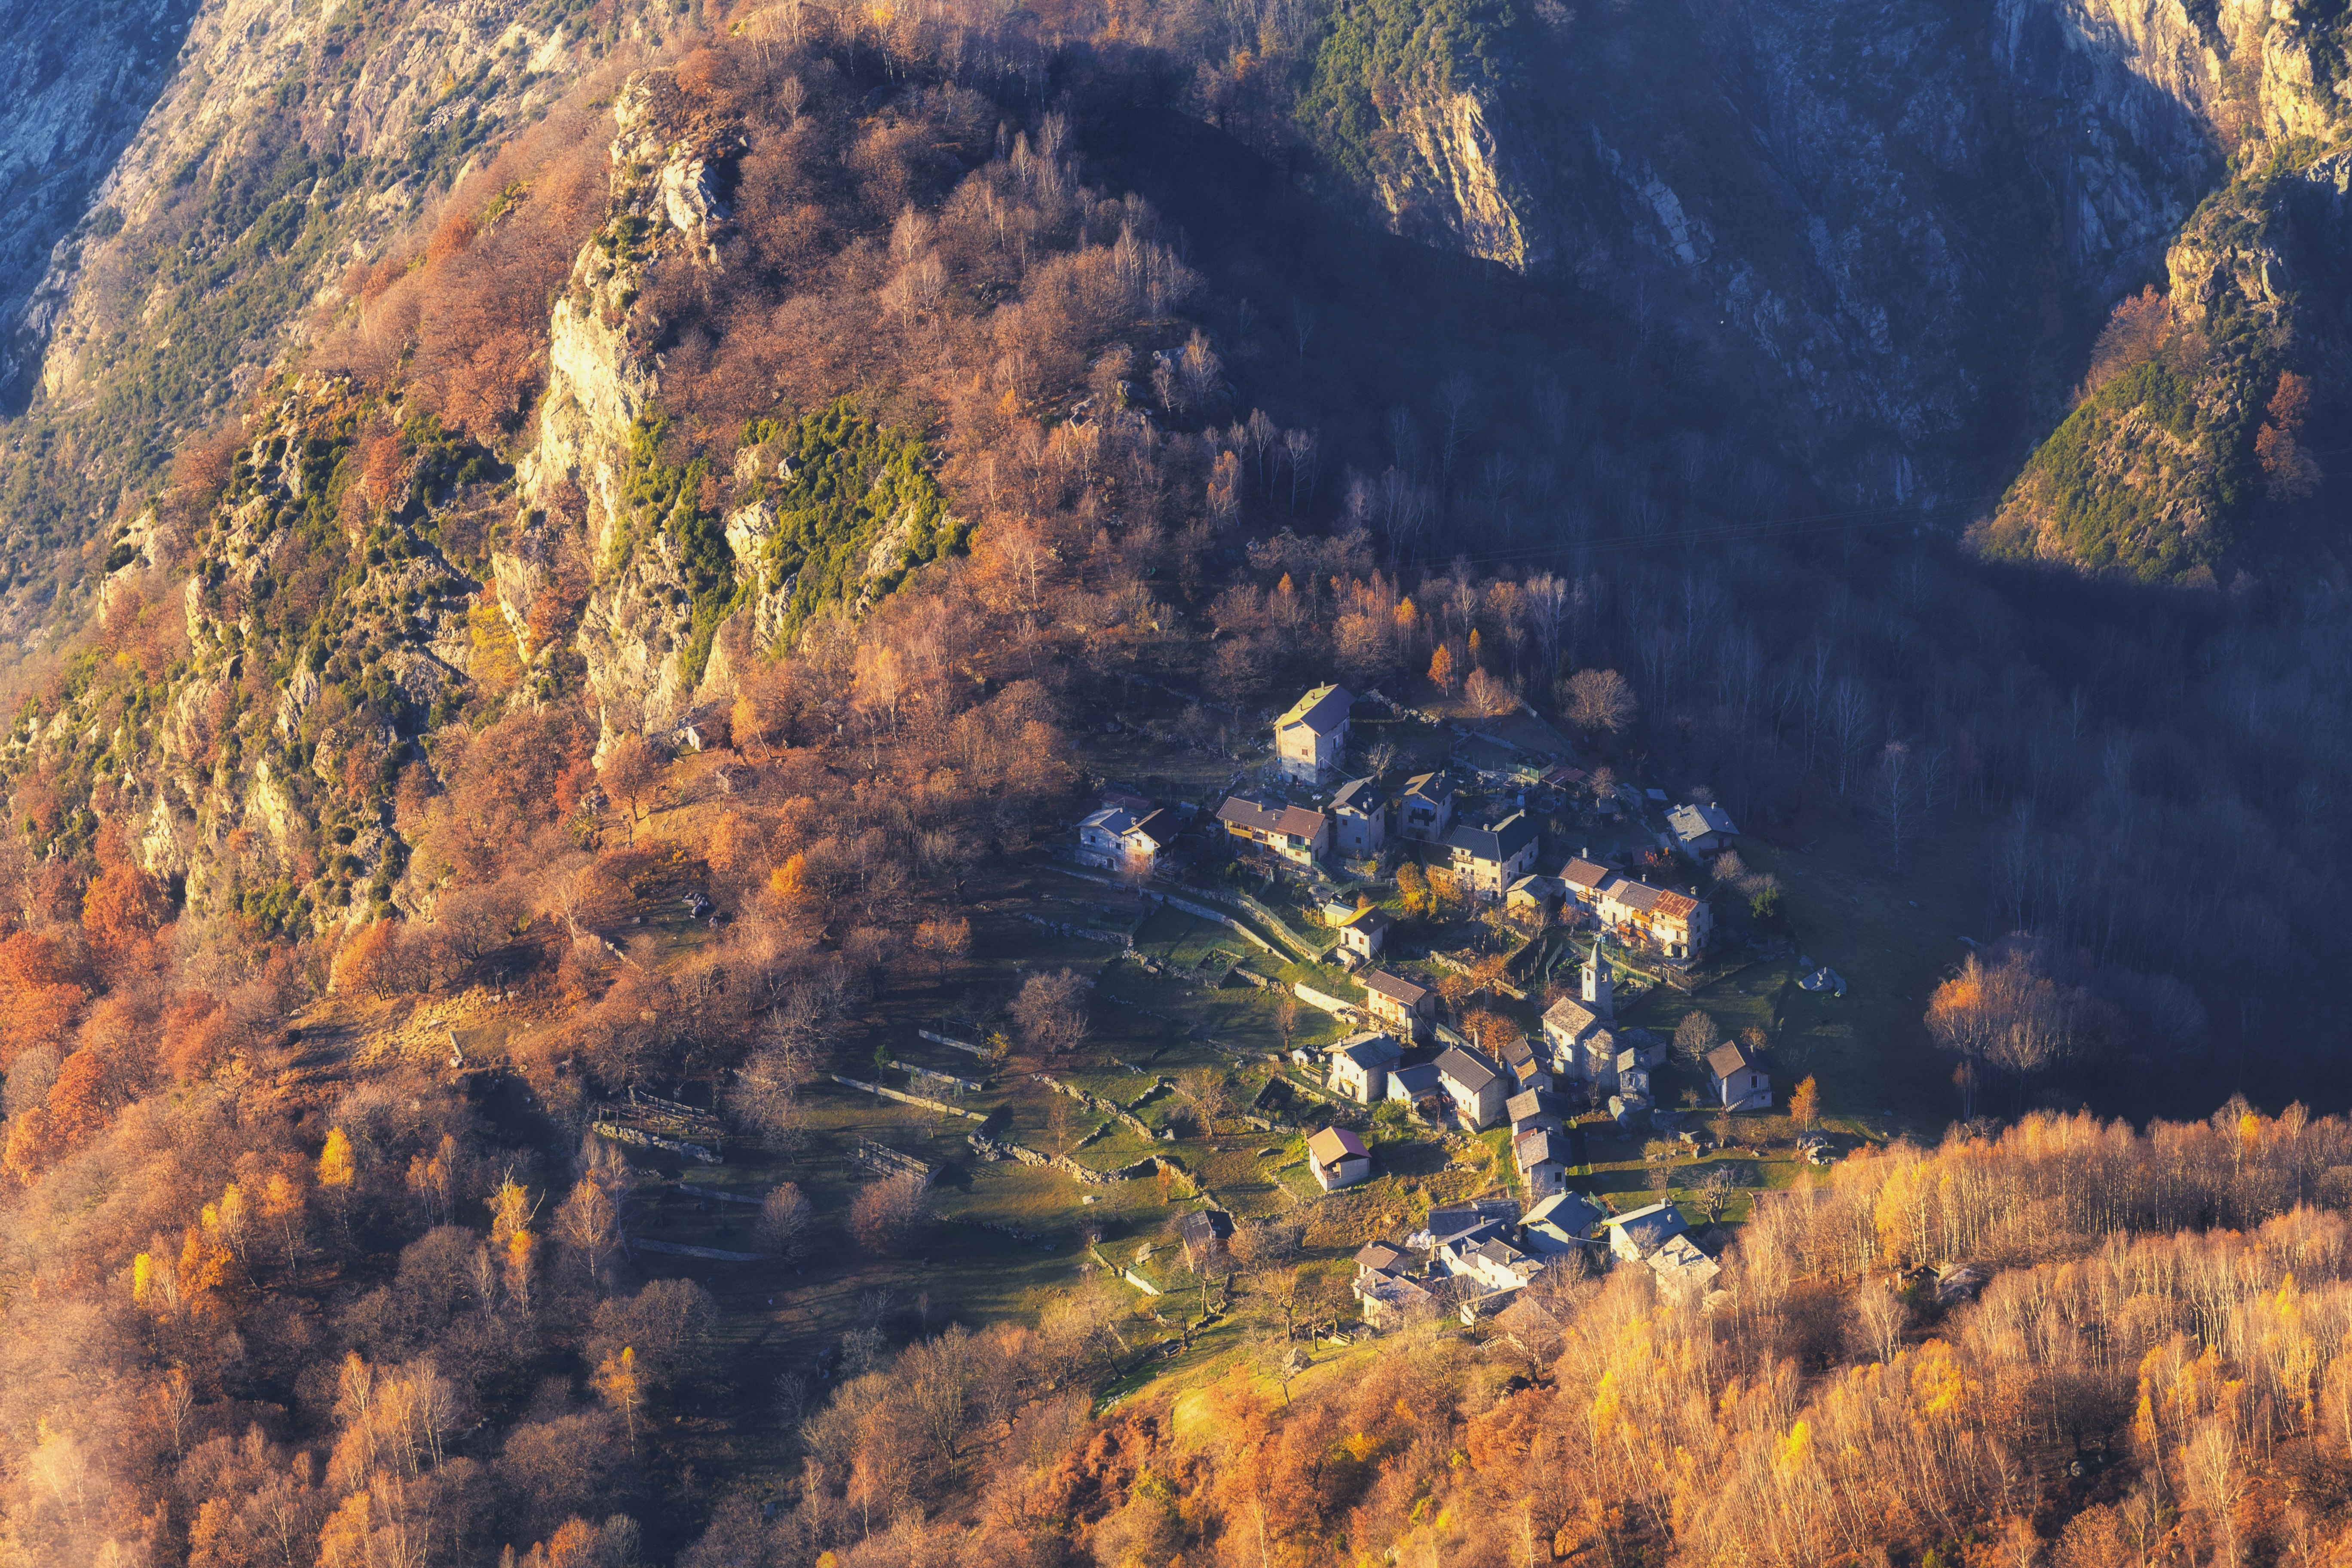 The mountain village of San Giorgio in northern Italy is seen from above as it is awash in fall colors